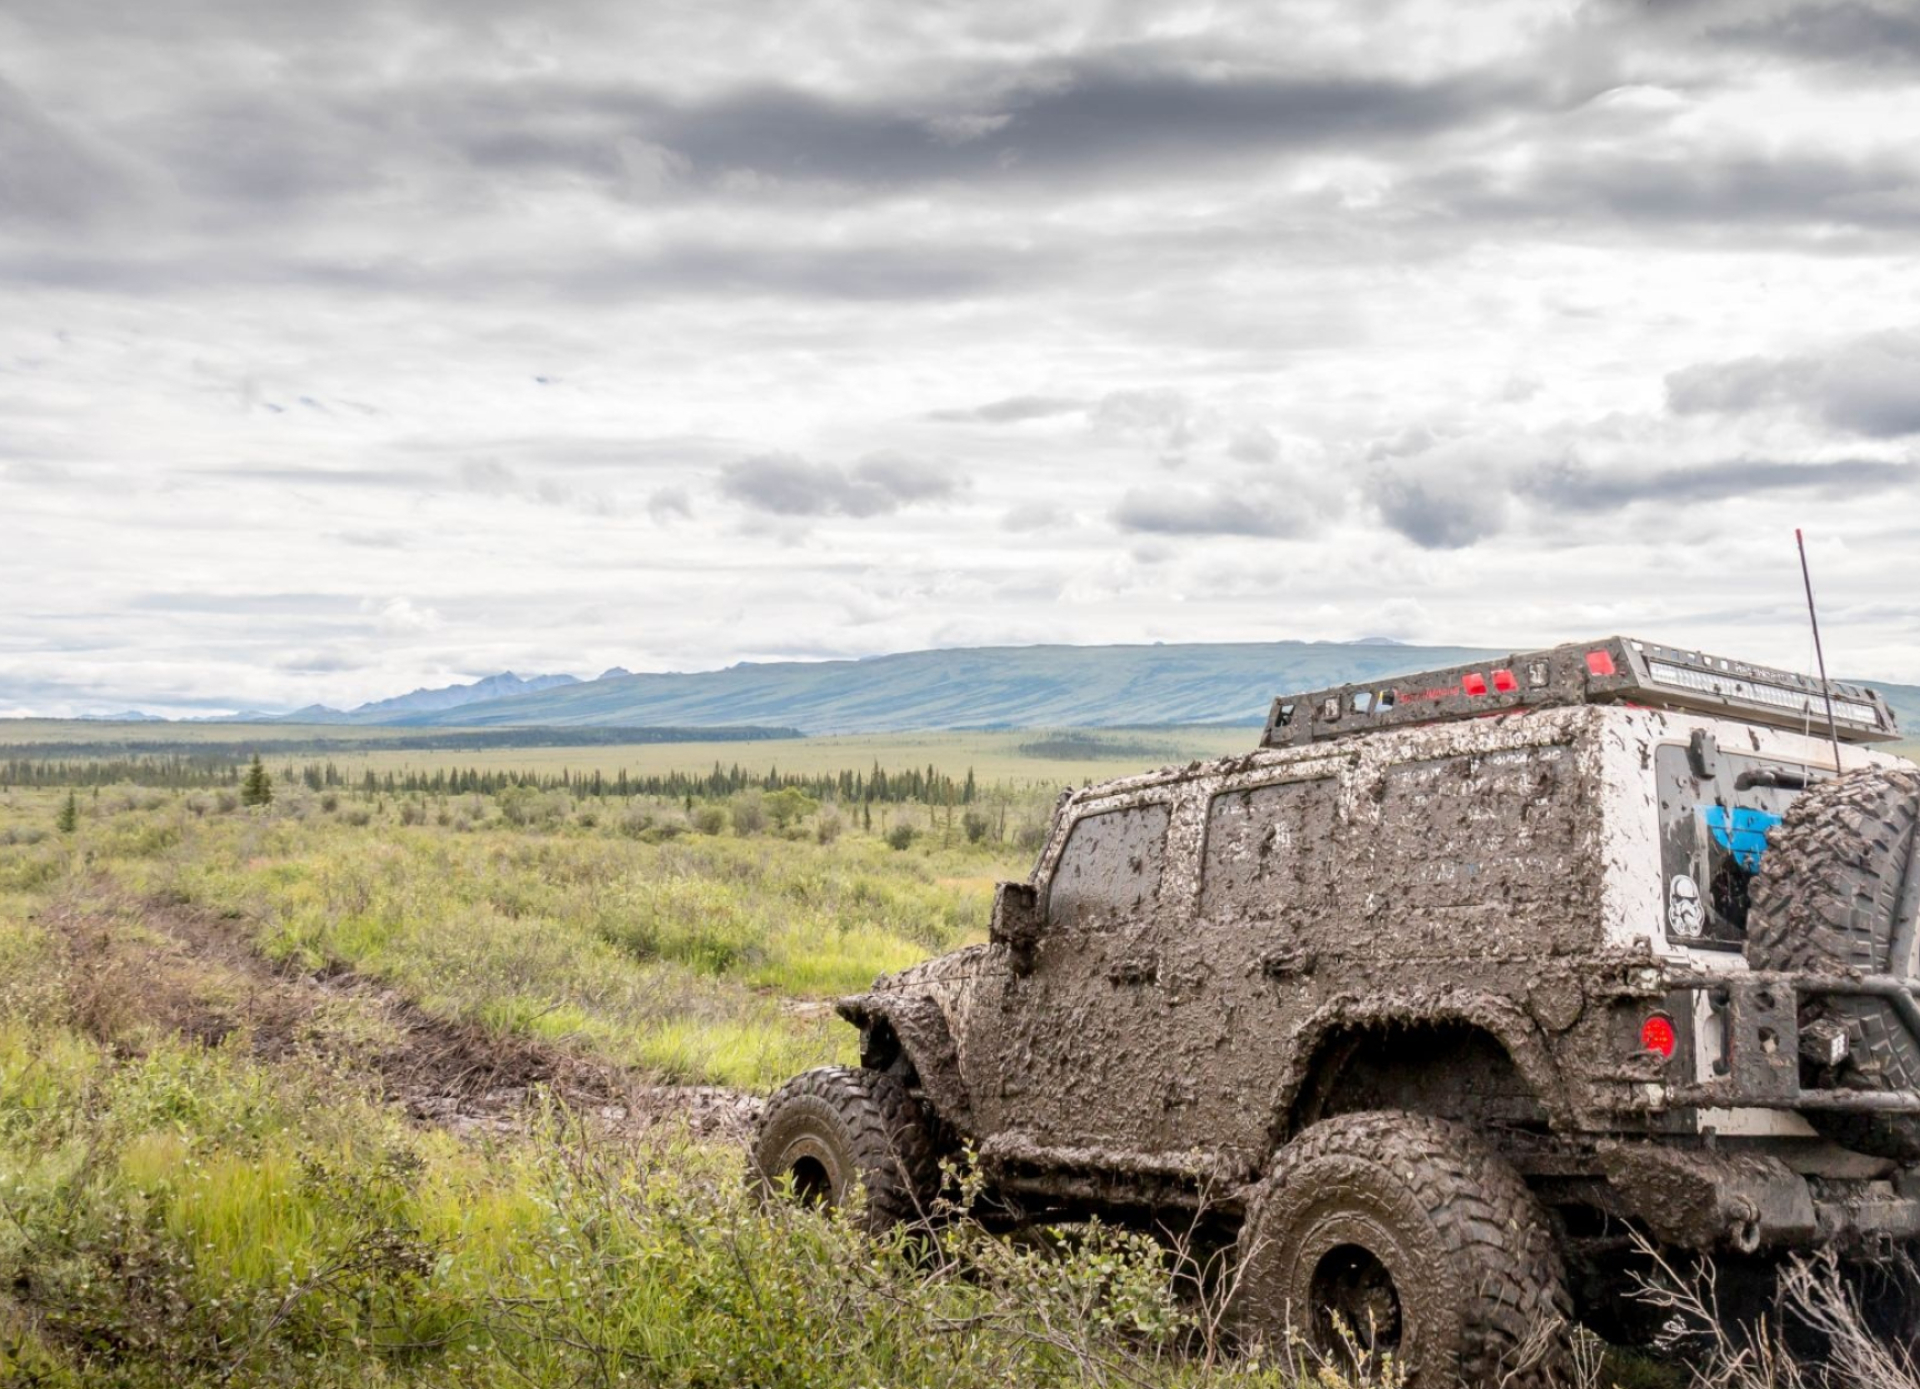 Off-road Driving: Mudding, Off-roading through an area of wet mud or clay, Driving a 4×4 truck. 1920x1390 HD Wallpaper.